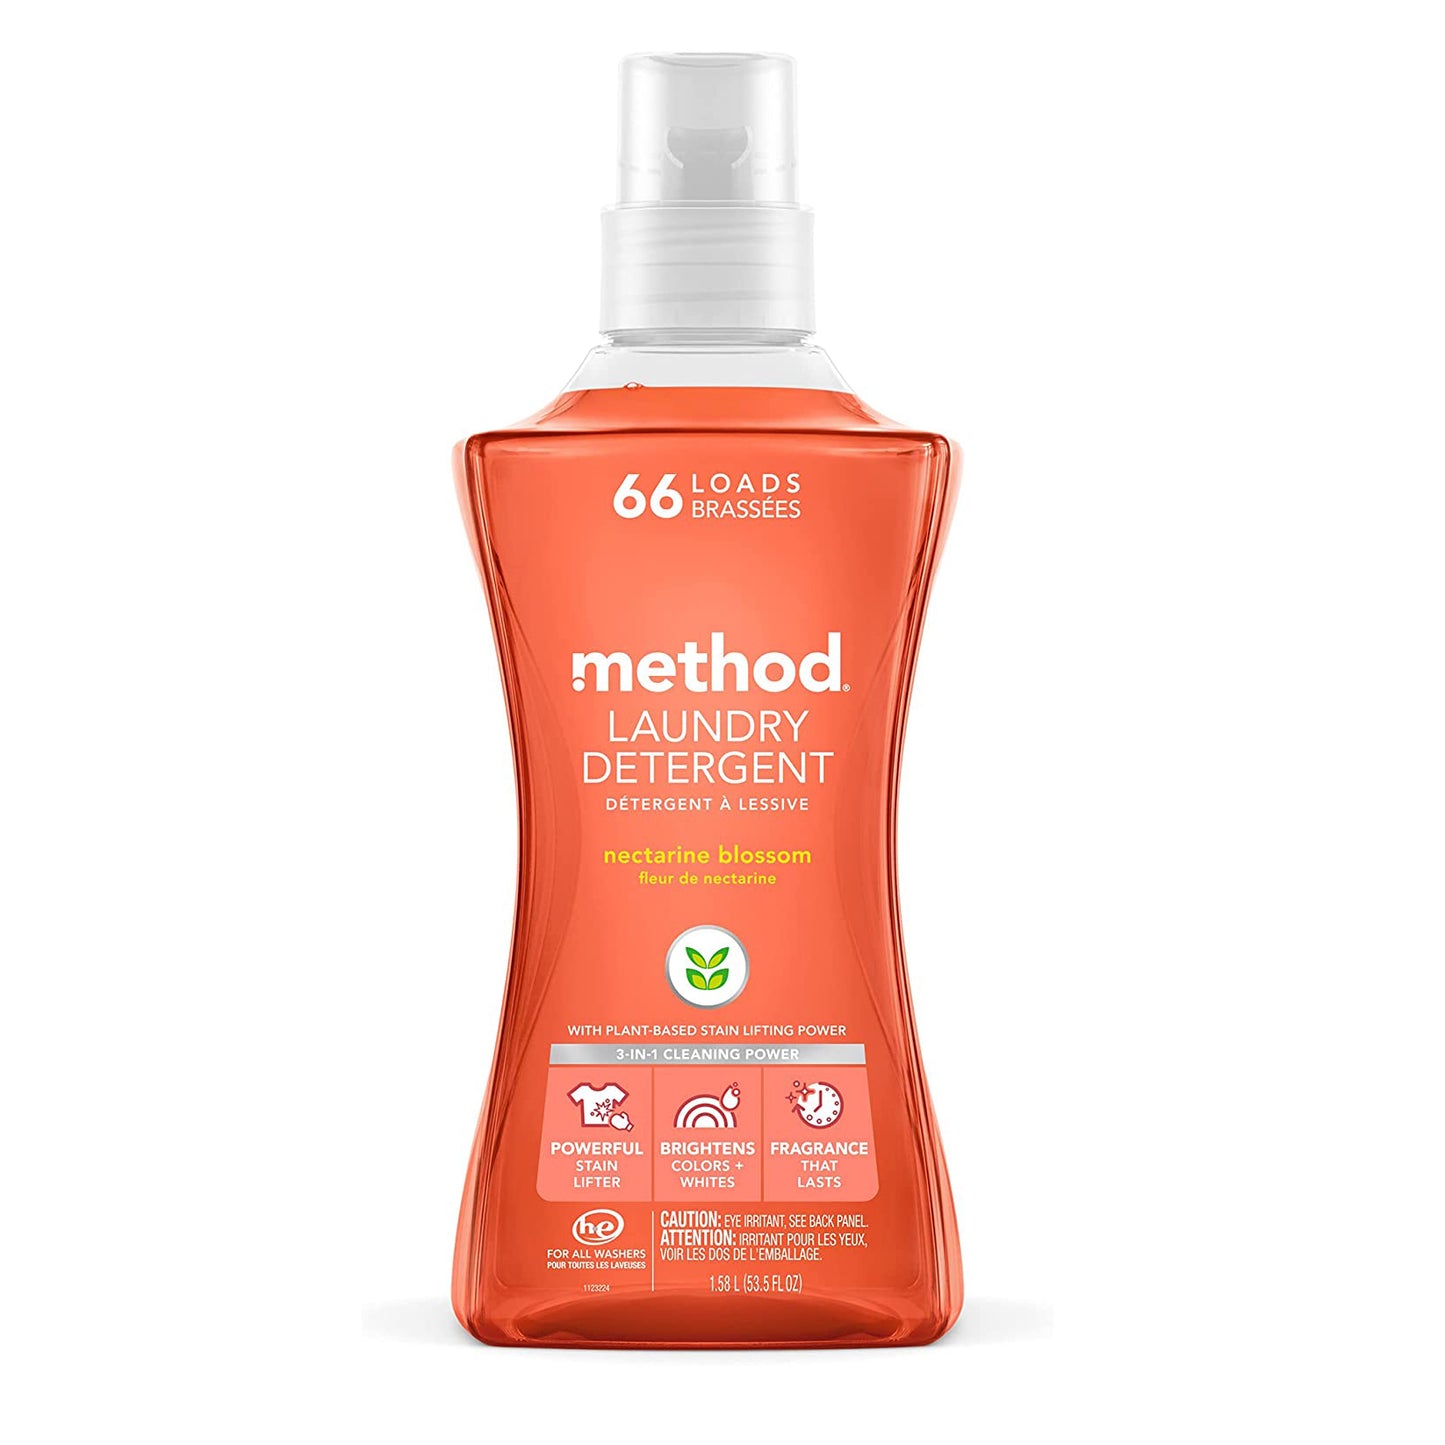 Method Laundry Detergent, Nectarine Blossom, 53.5 Ounces, 66 Loads, 1 pack, Packaging May Vary